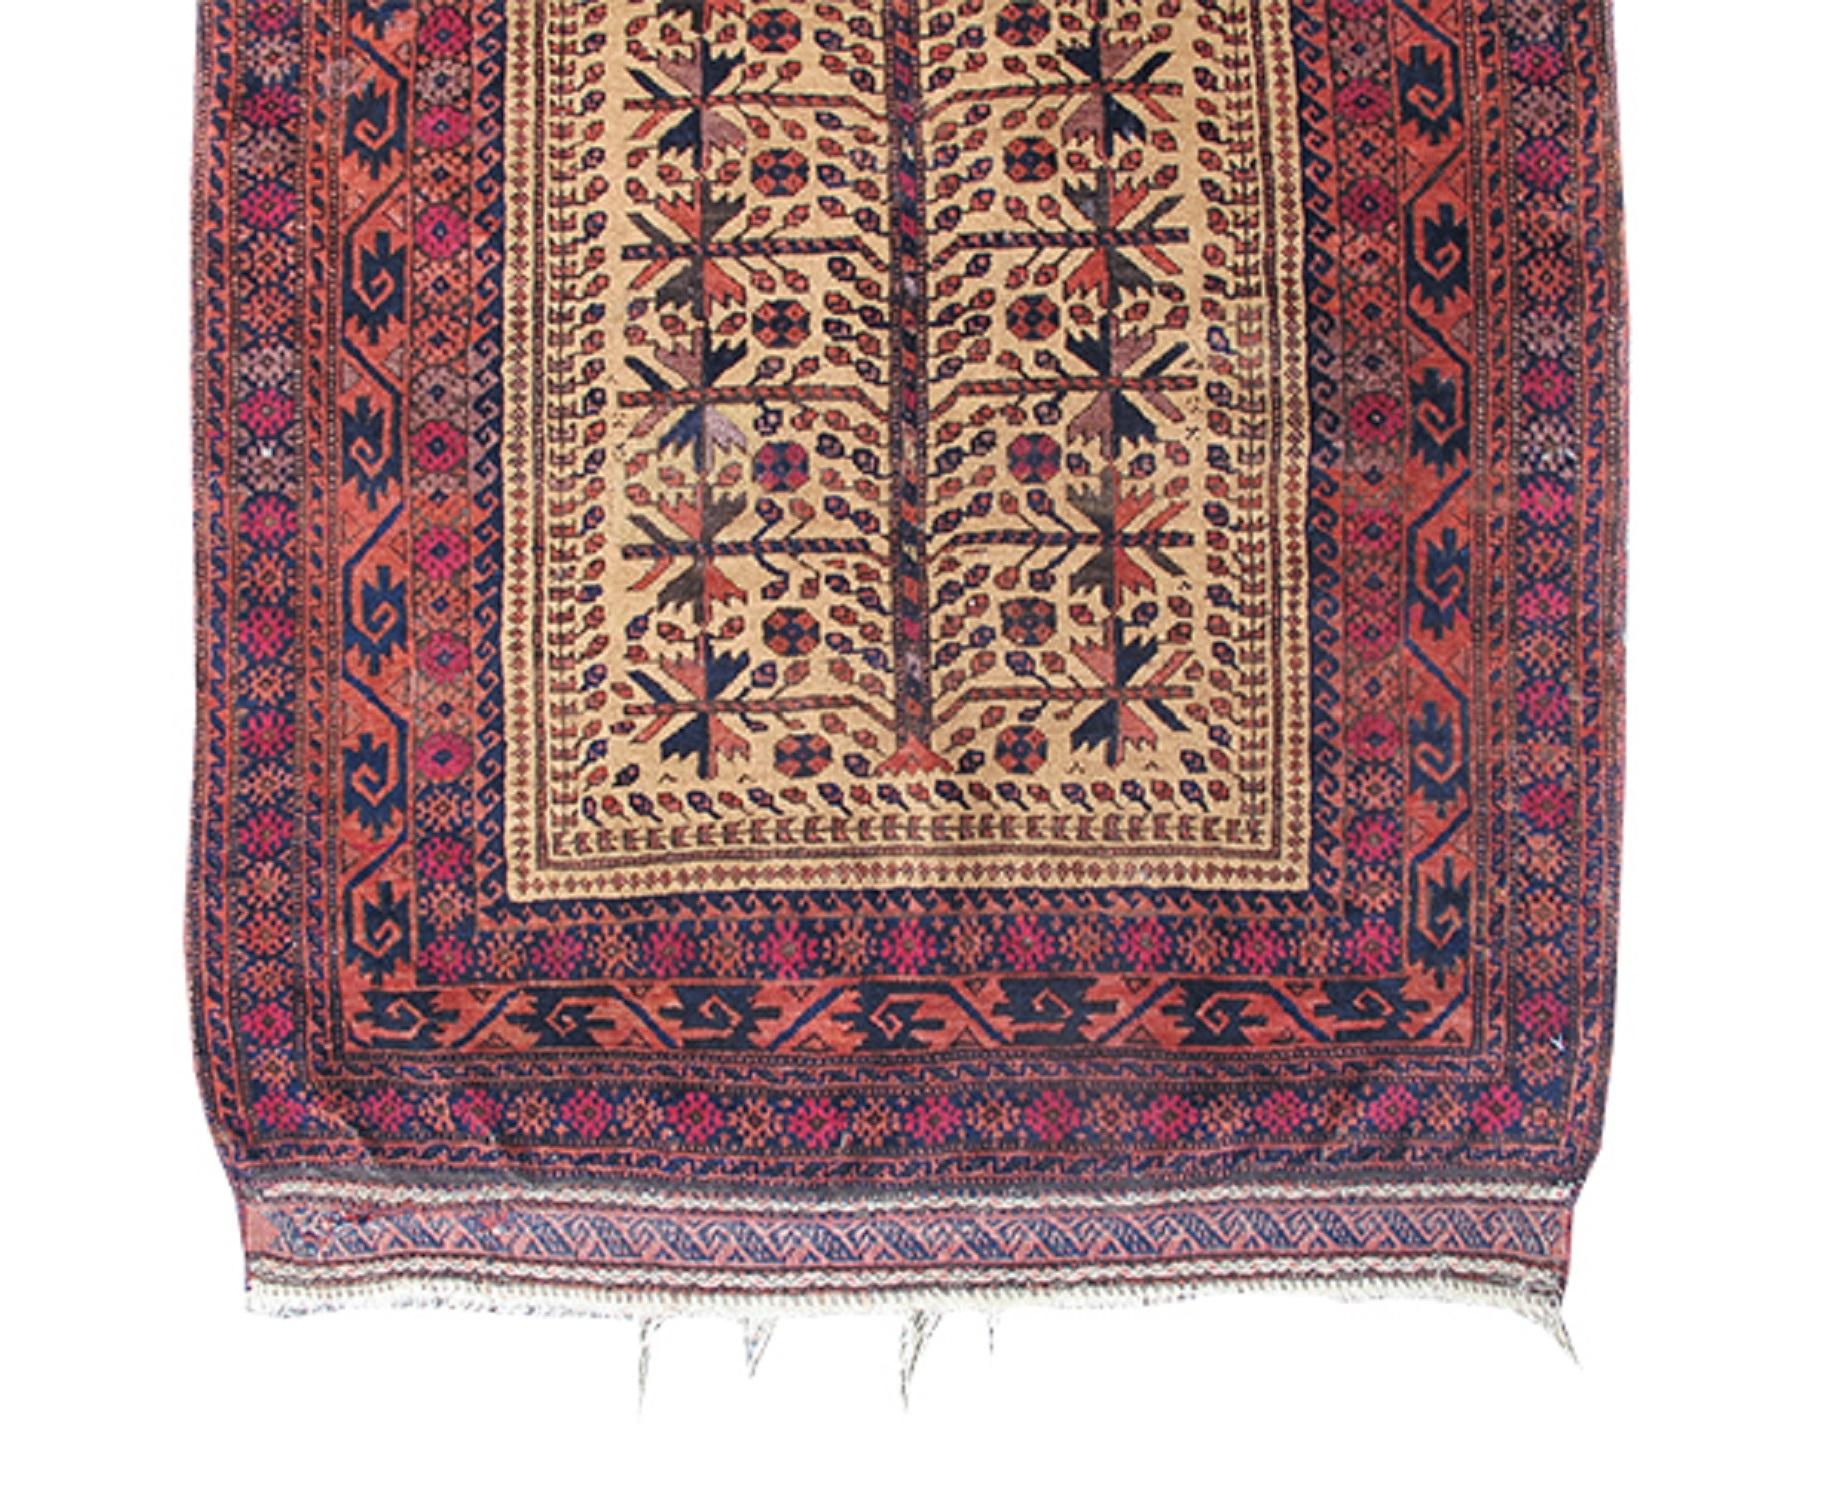 Antique Baluch Prayer Rug, c. 1900

This elegant Baluch prayer rug combines precise drawing with fine detailing and weave. A classic Baluchi tree of life is drawn against a light camel ground punctuated by fine blossoming branches emanating from a